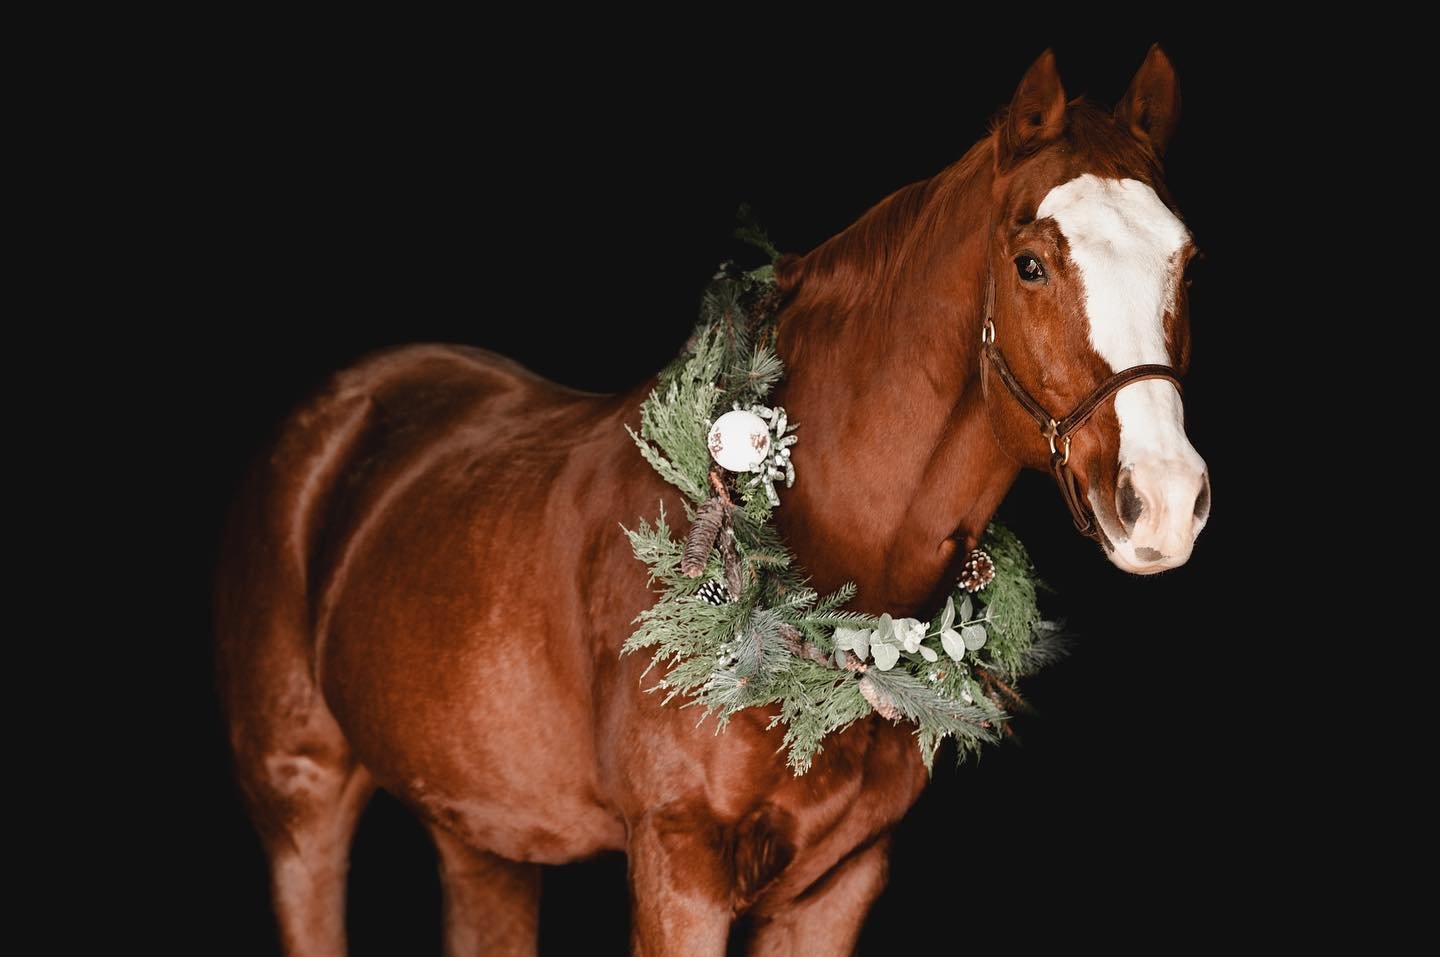 Festive ponies are my favorite ponies 🎄🎄
.
.
#horsephotographer #equestrainphotography #wreathphotography